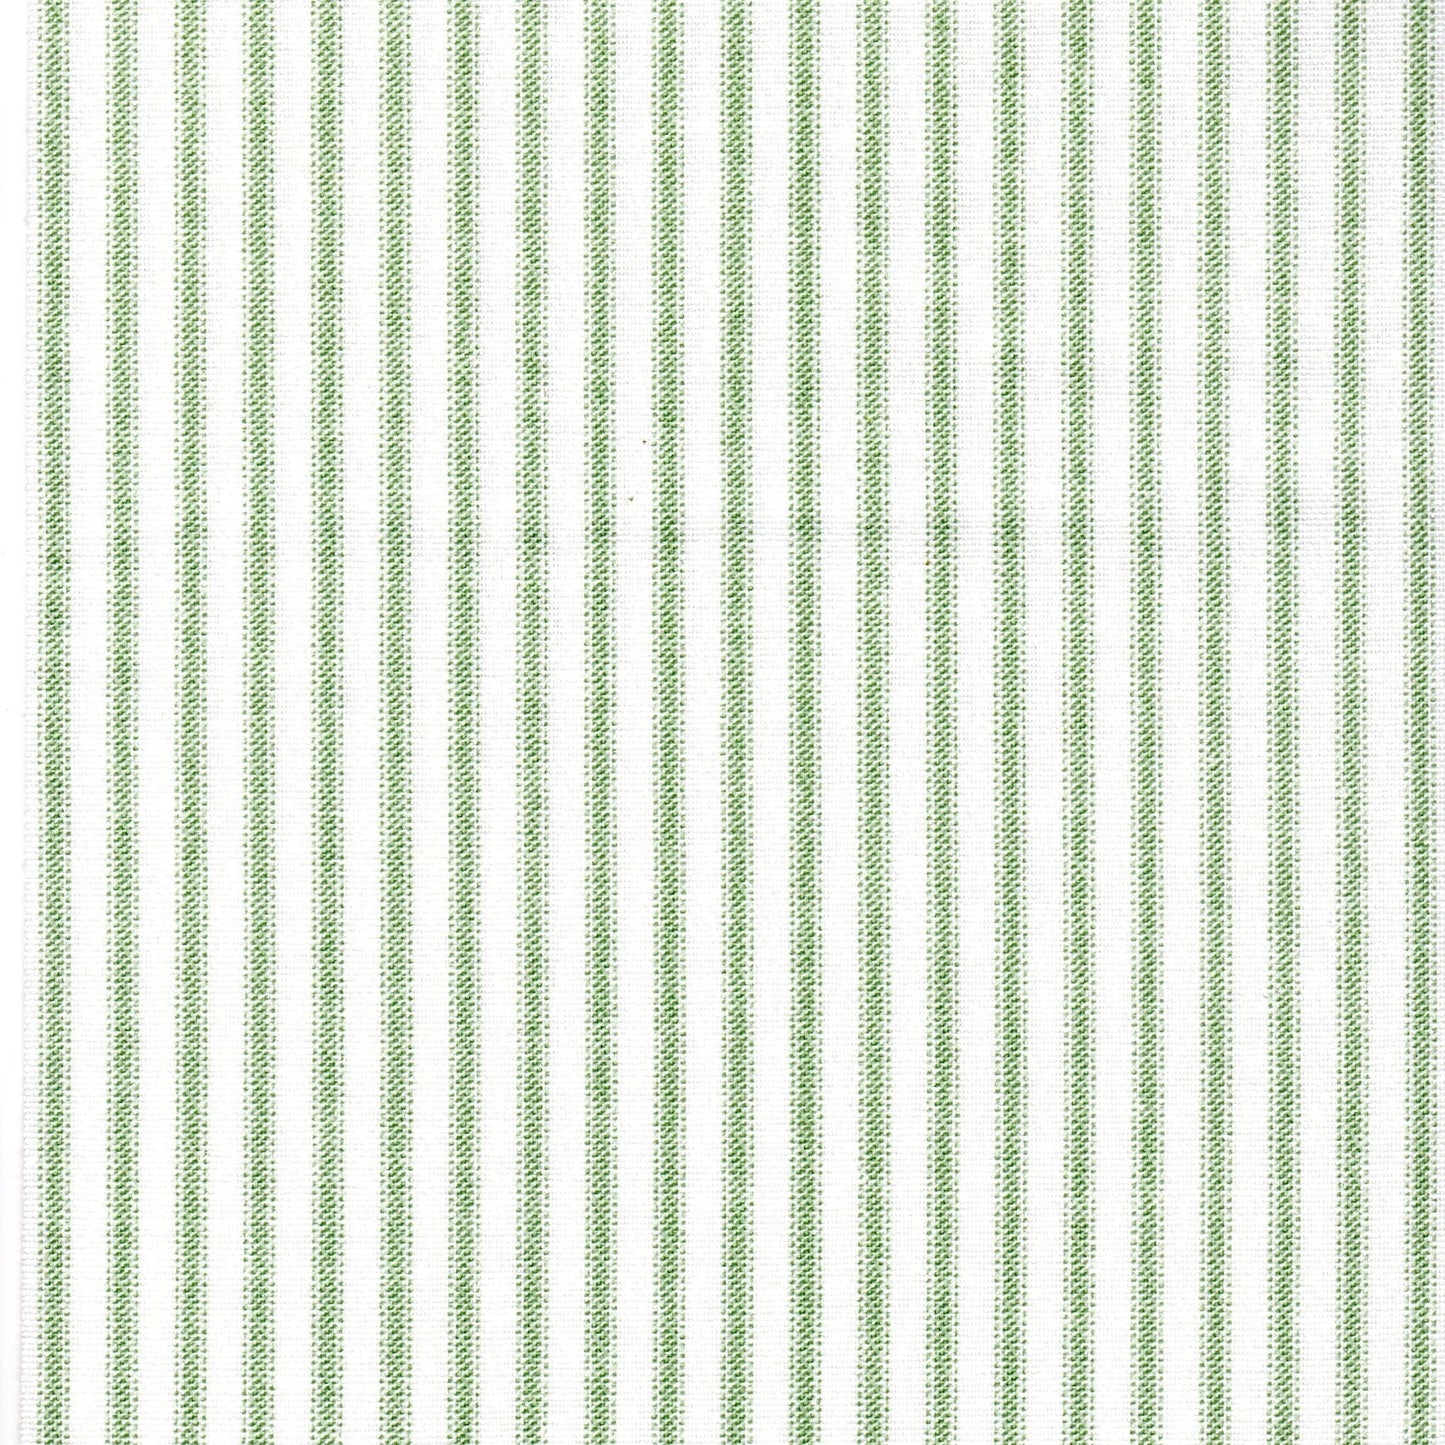 pinch pleated curtains in Classic Sage Green Ticking Stripe on White